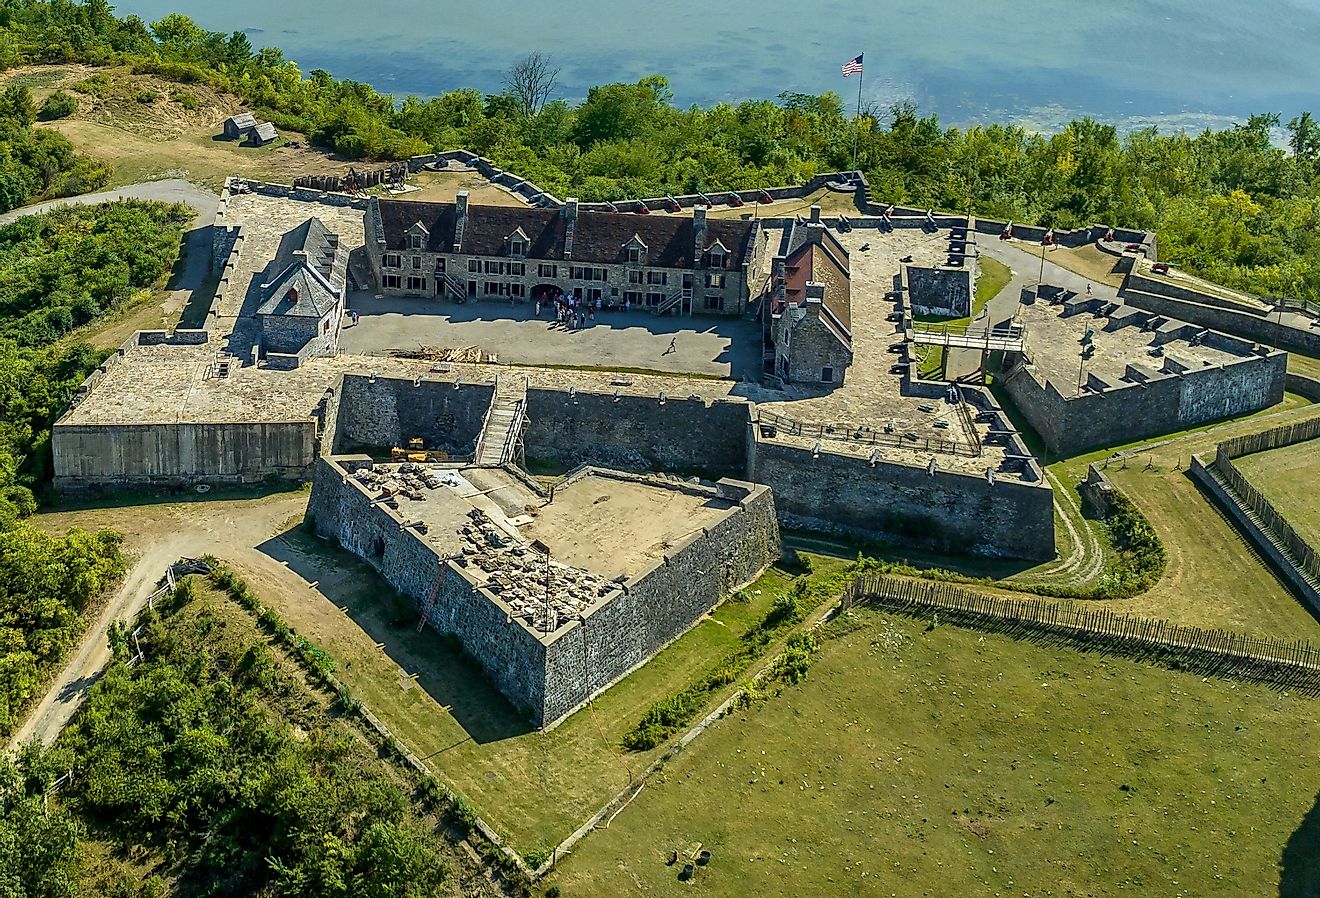 Aerial view of Fort Ticonderoga on Lake George, New York.